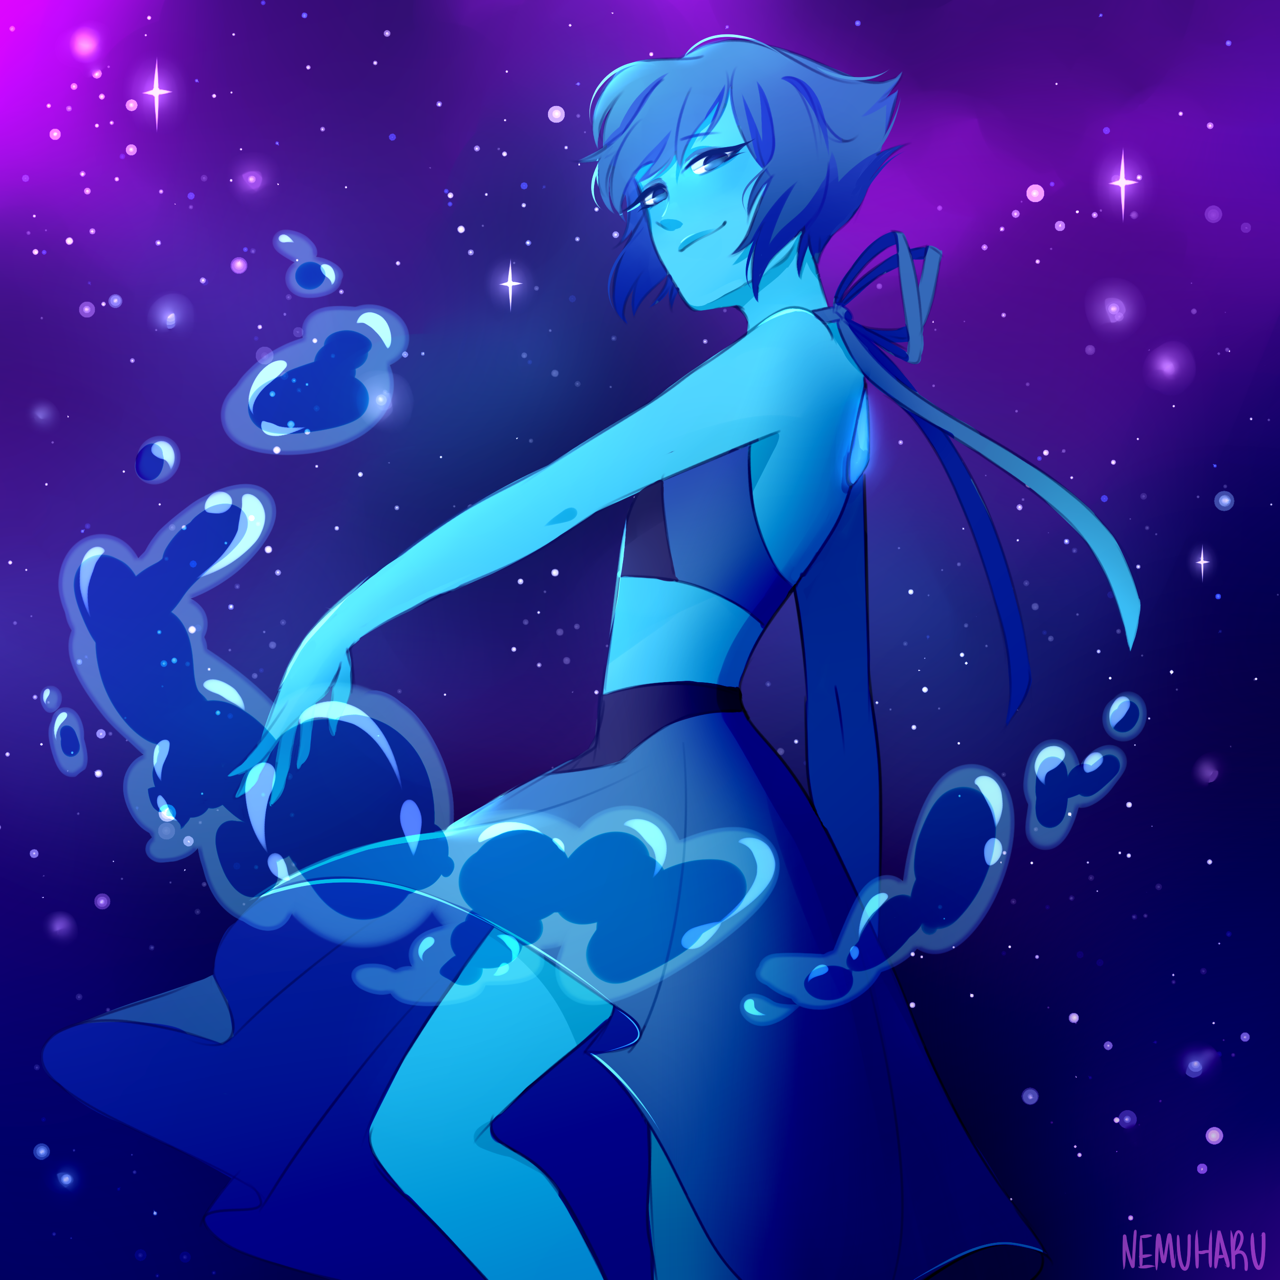 Lapis Lazuli fanart from awhile back!! Galaxy is always super fun to draw lololol This is like one of the only things I’ve drawn lately that actually looks complete _(´ཀ`」 ∠)_